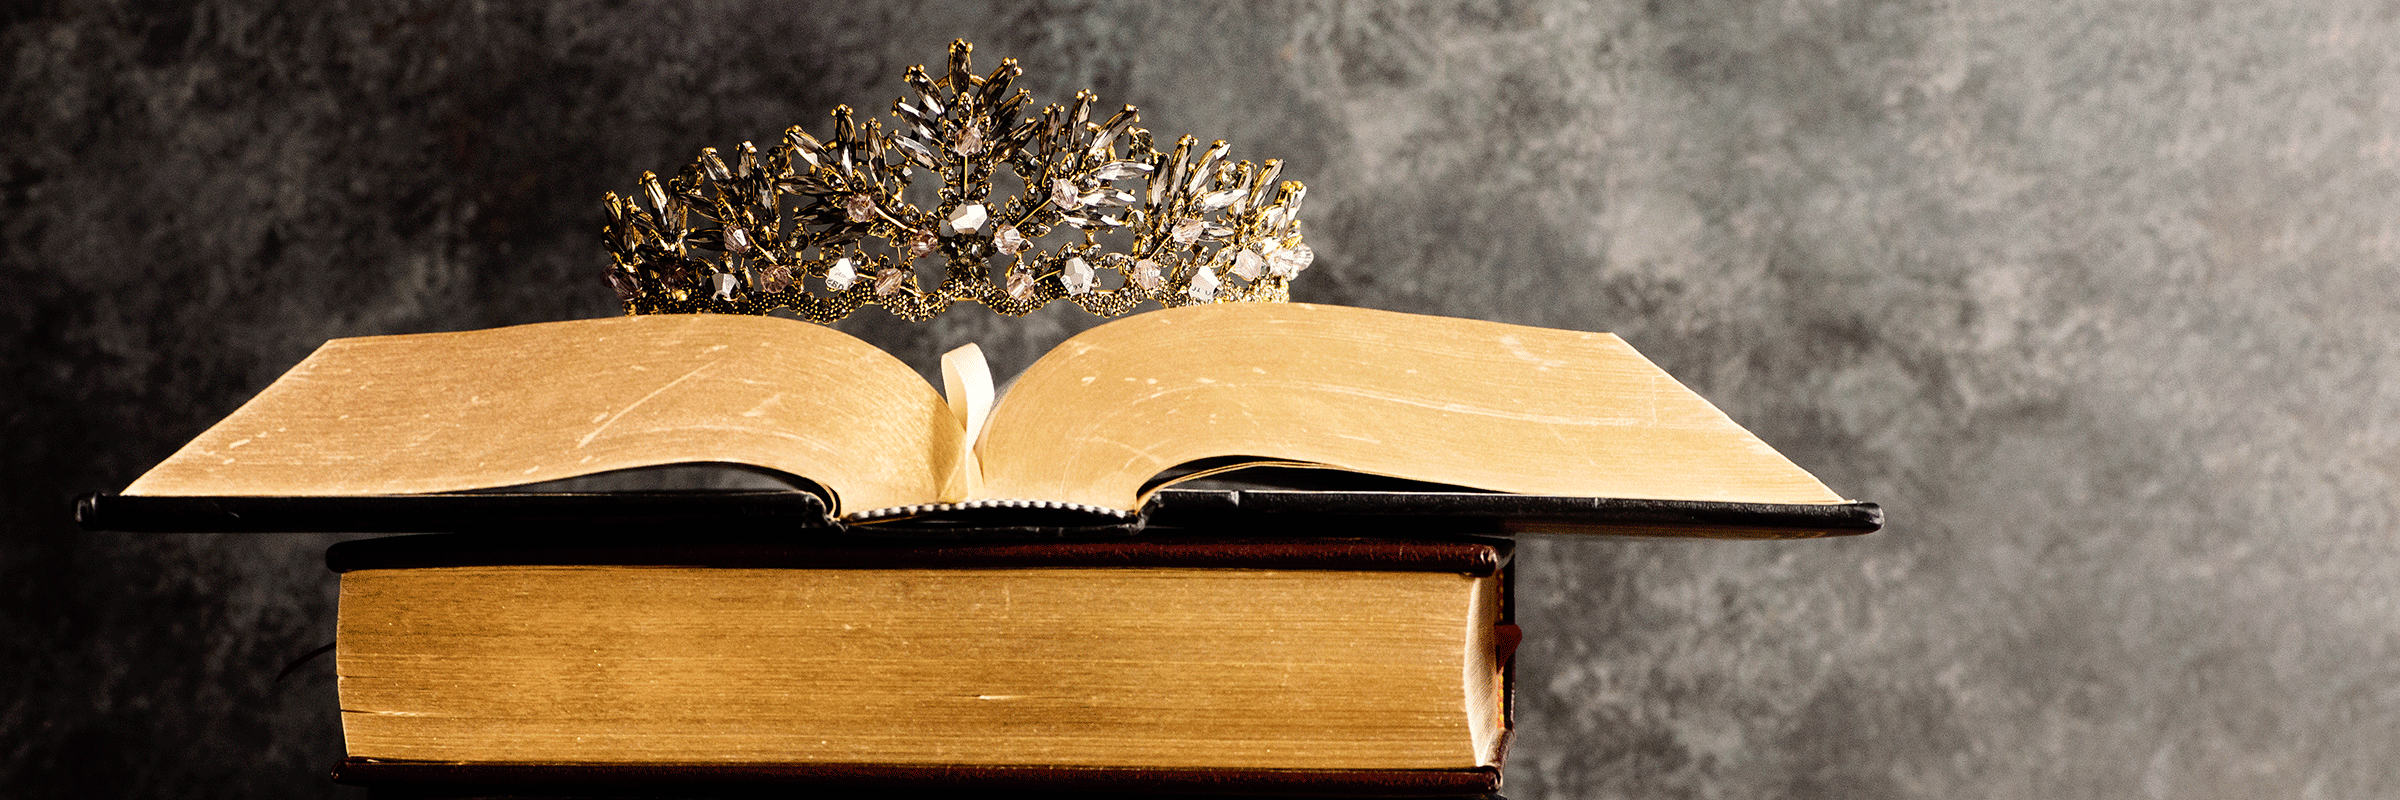 crown and books